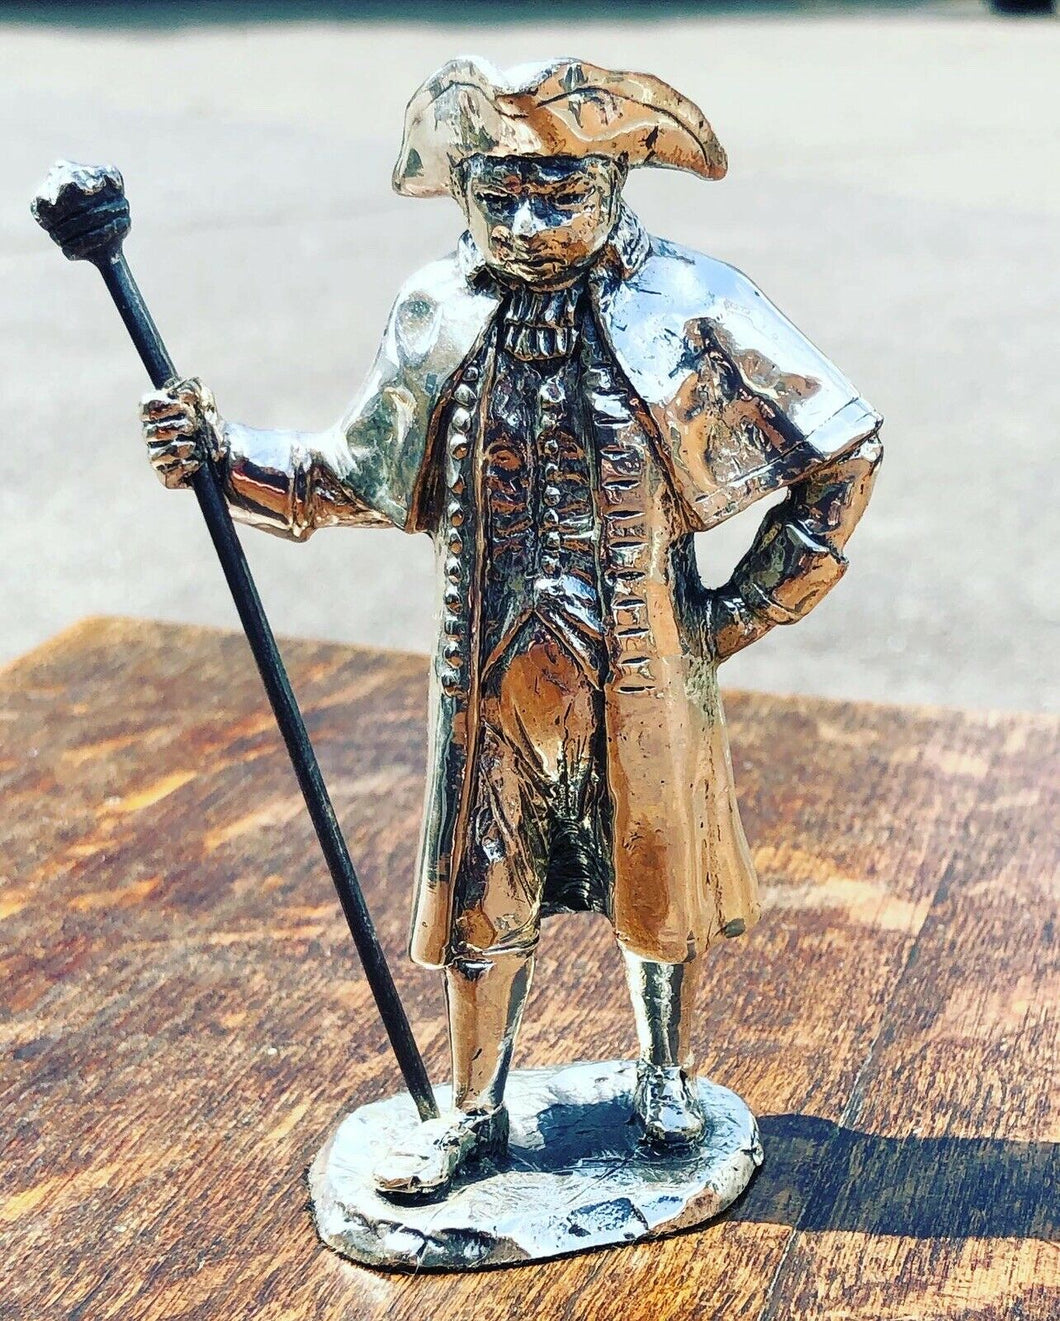 Silver Plate Figure. Town Squire, Highly Detailed Figure